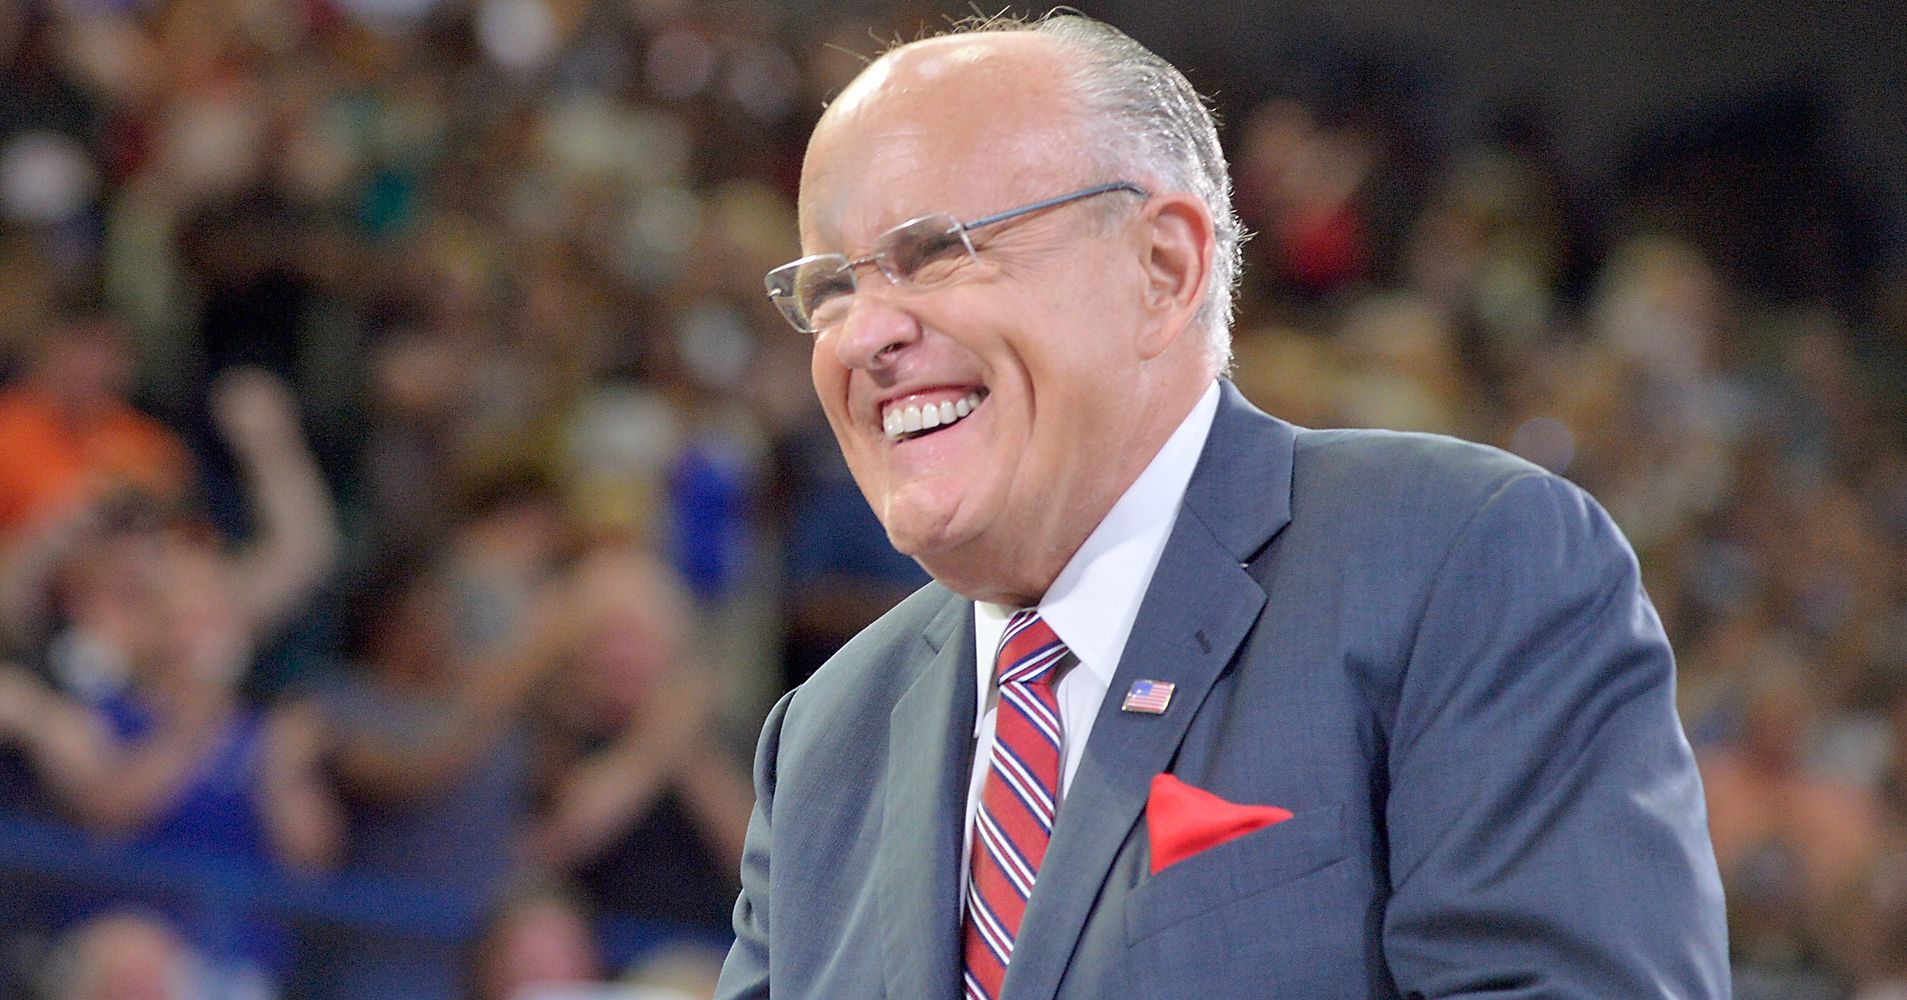 Rudy Giuliani Claims Online Videos Show Hillary Clinton Is Unhealthy | HuffPost1907 x 1000